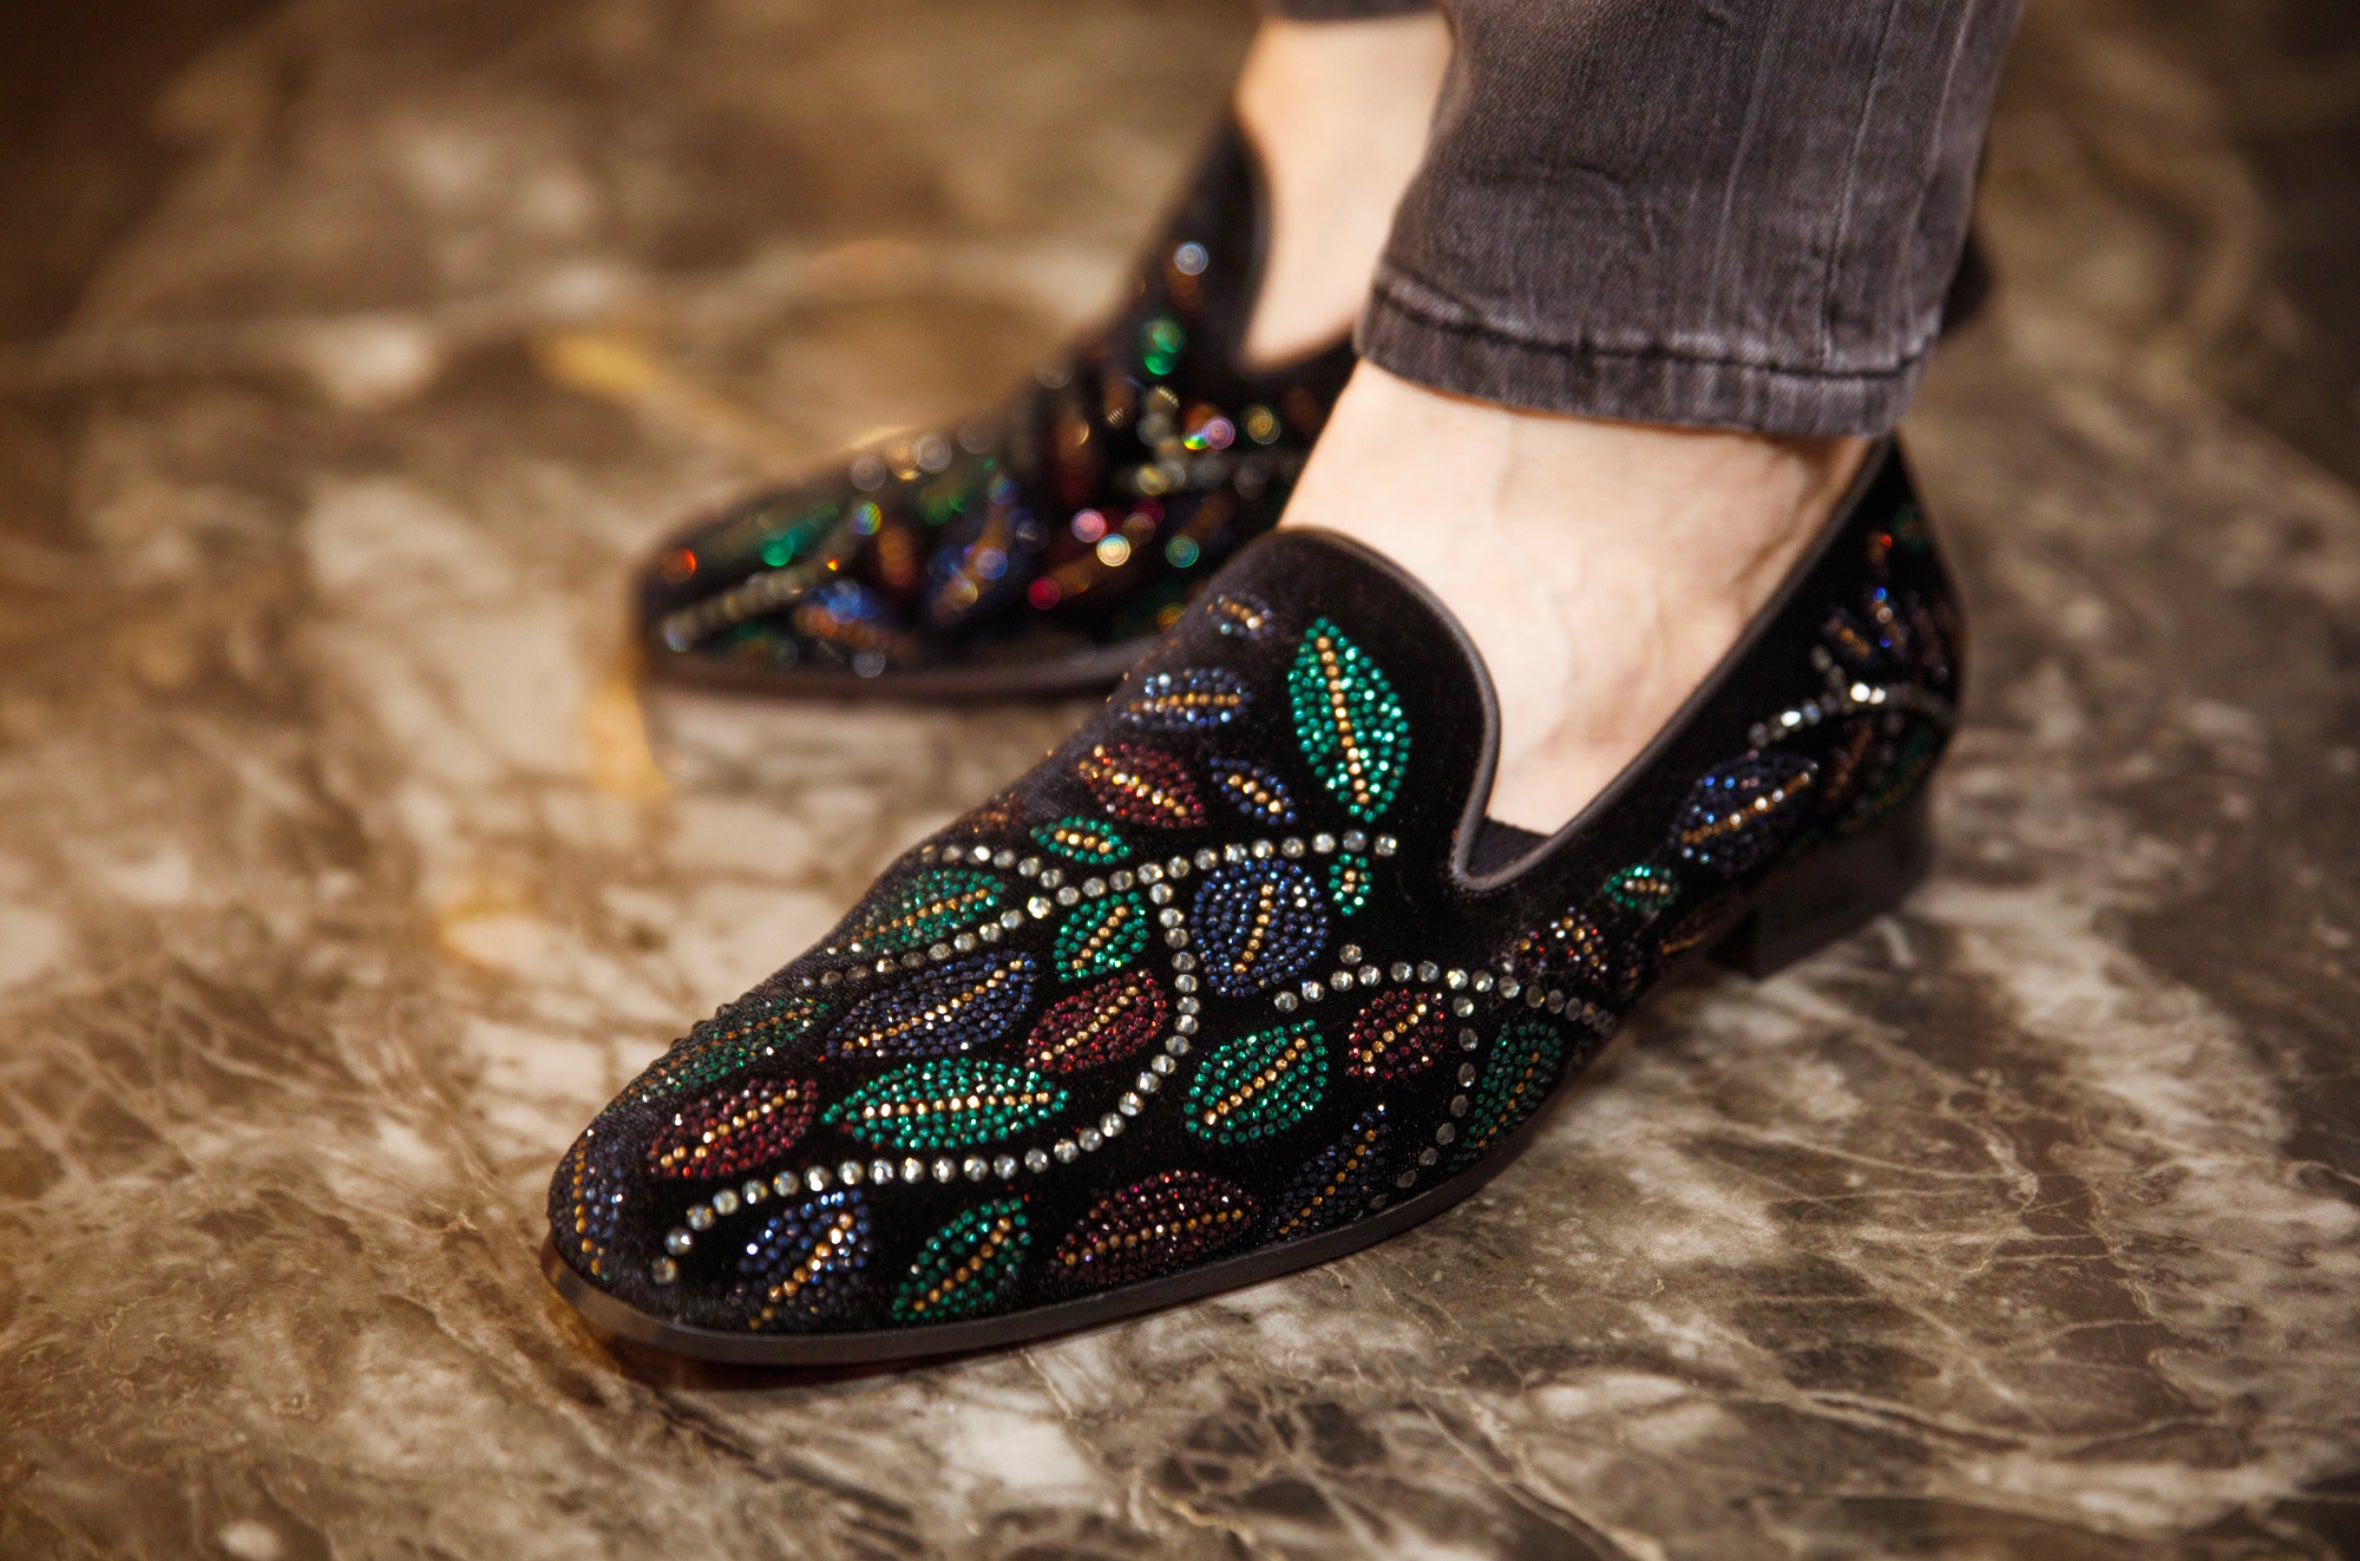 The Diamond Leaf Loafers - Loafers by Urbbana